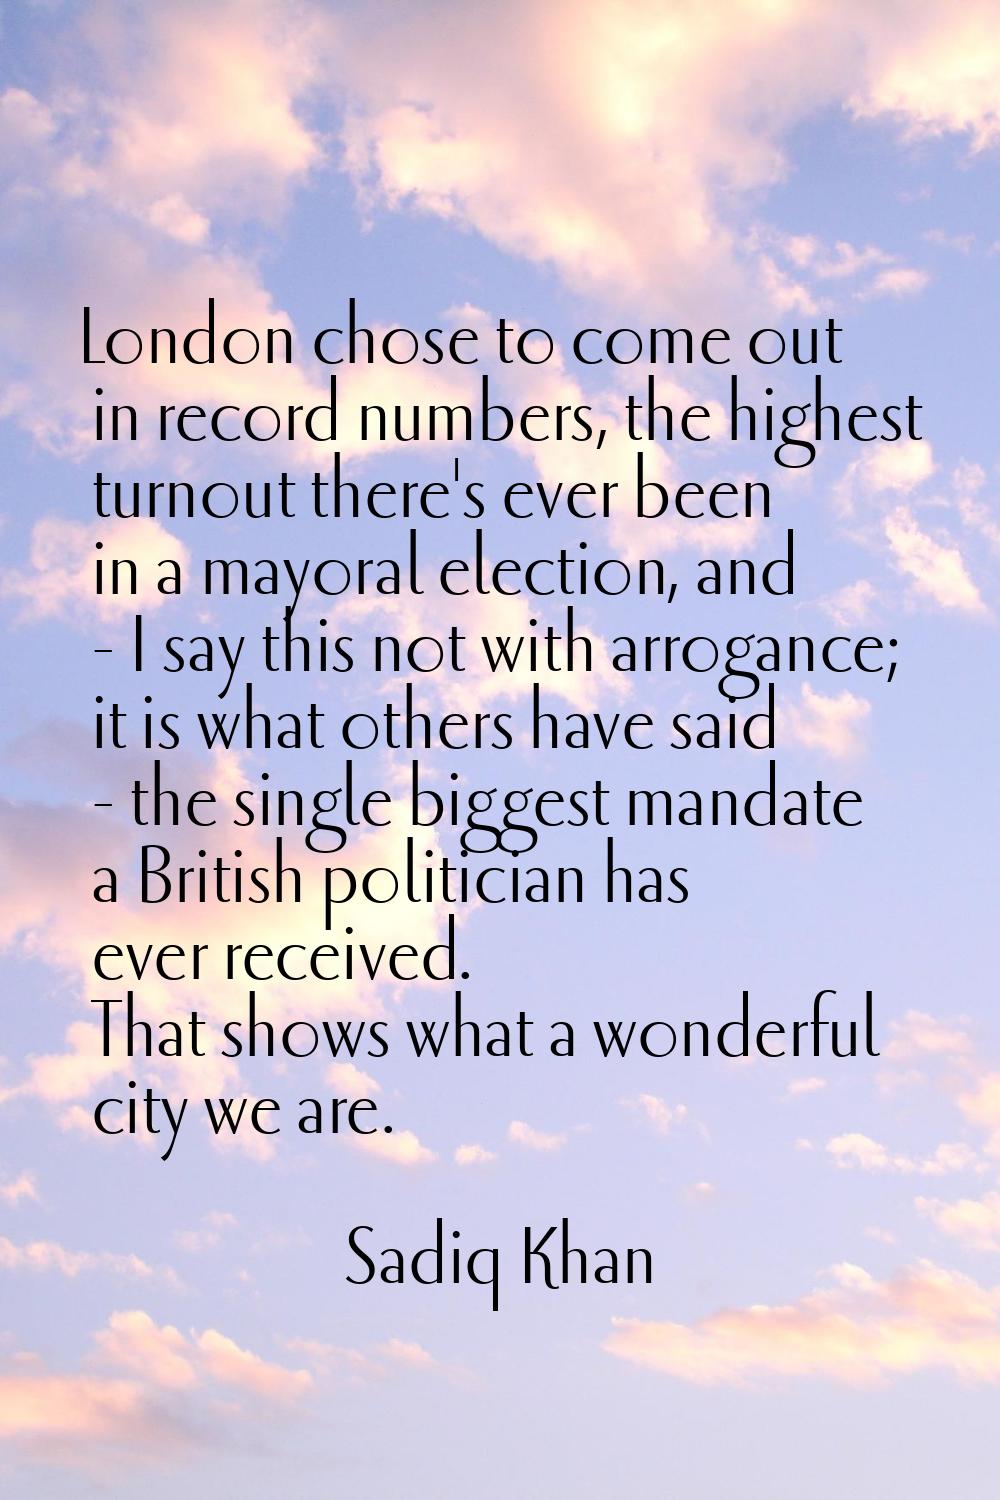 London chose to come out in record numbers, the highest turnout there's ever been in a mayoral elec